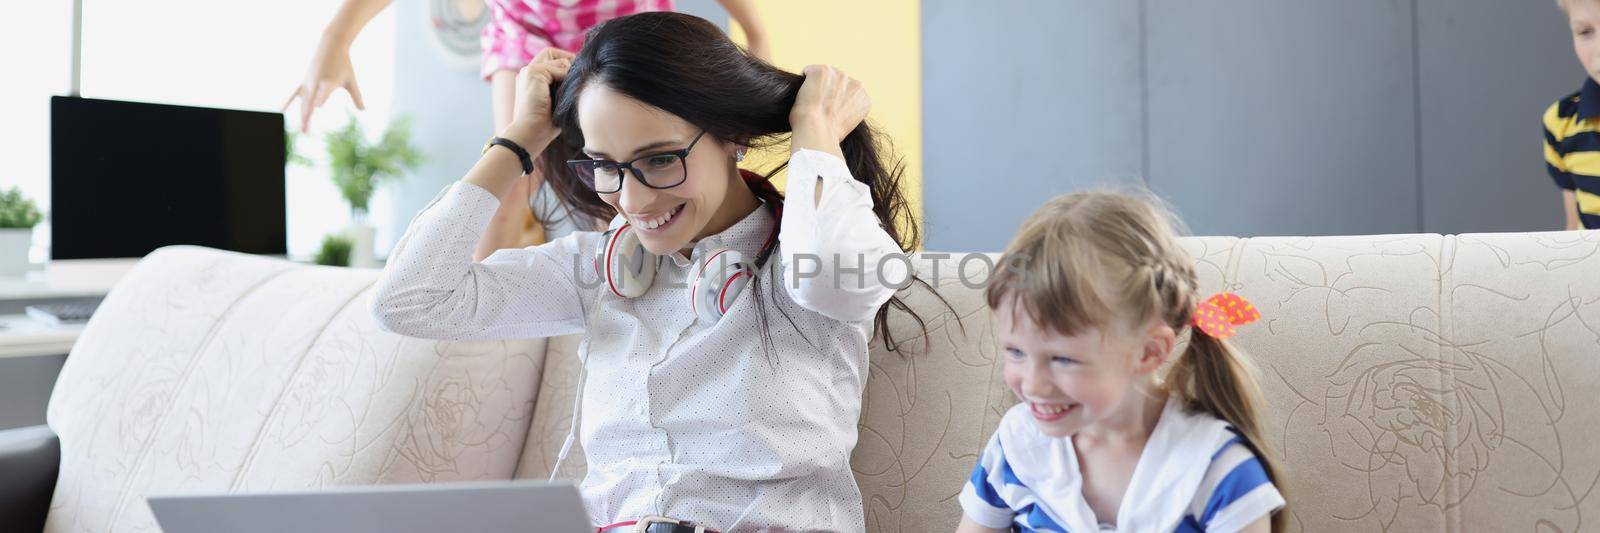 Portrait of happy woman working and playing with her kids on couch. Mother work from home, earn money for children. Parenthood, weekend, childhood concept